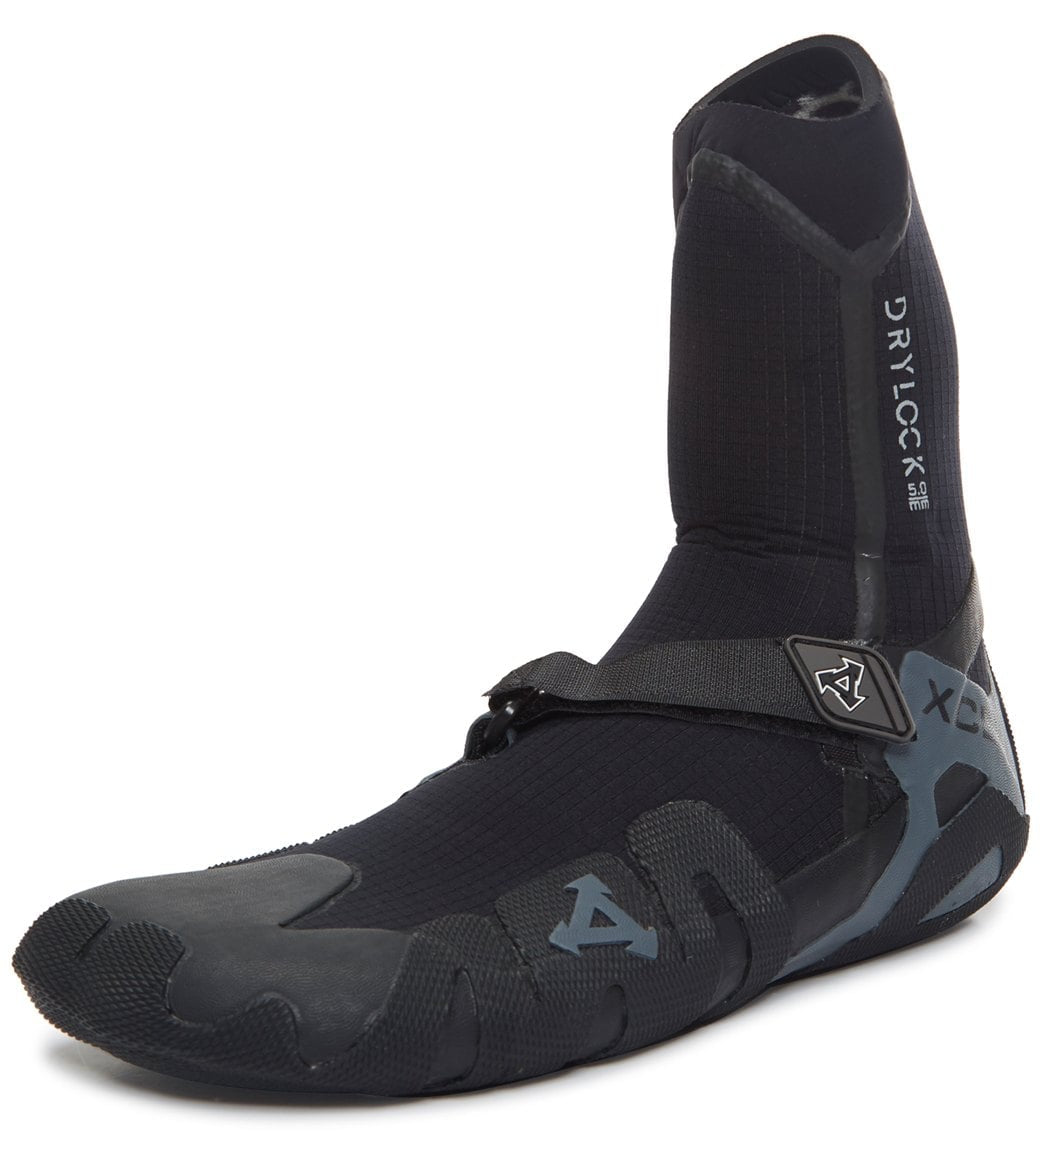 Xcel Men's Drylock Round Toe 5mm Surf Boot at SwimOutlet.com